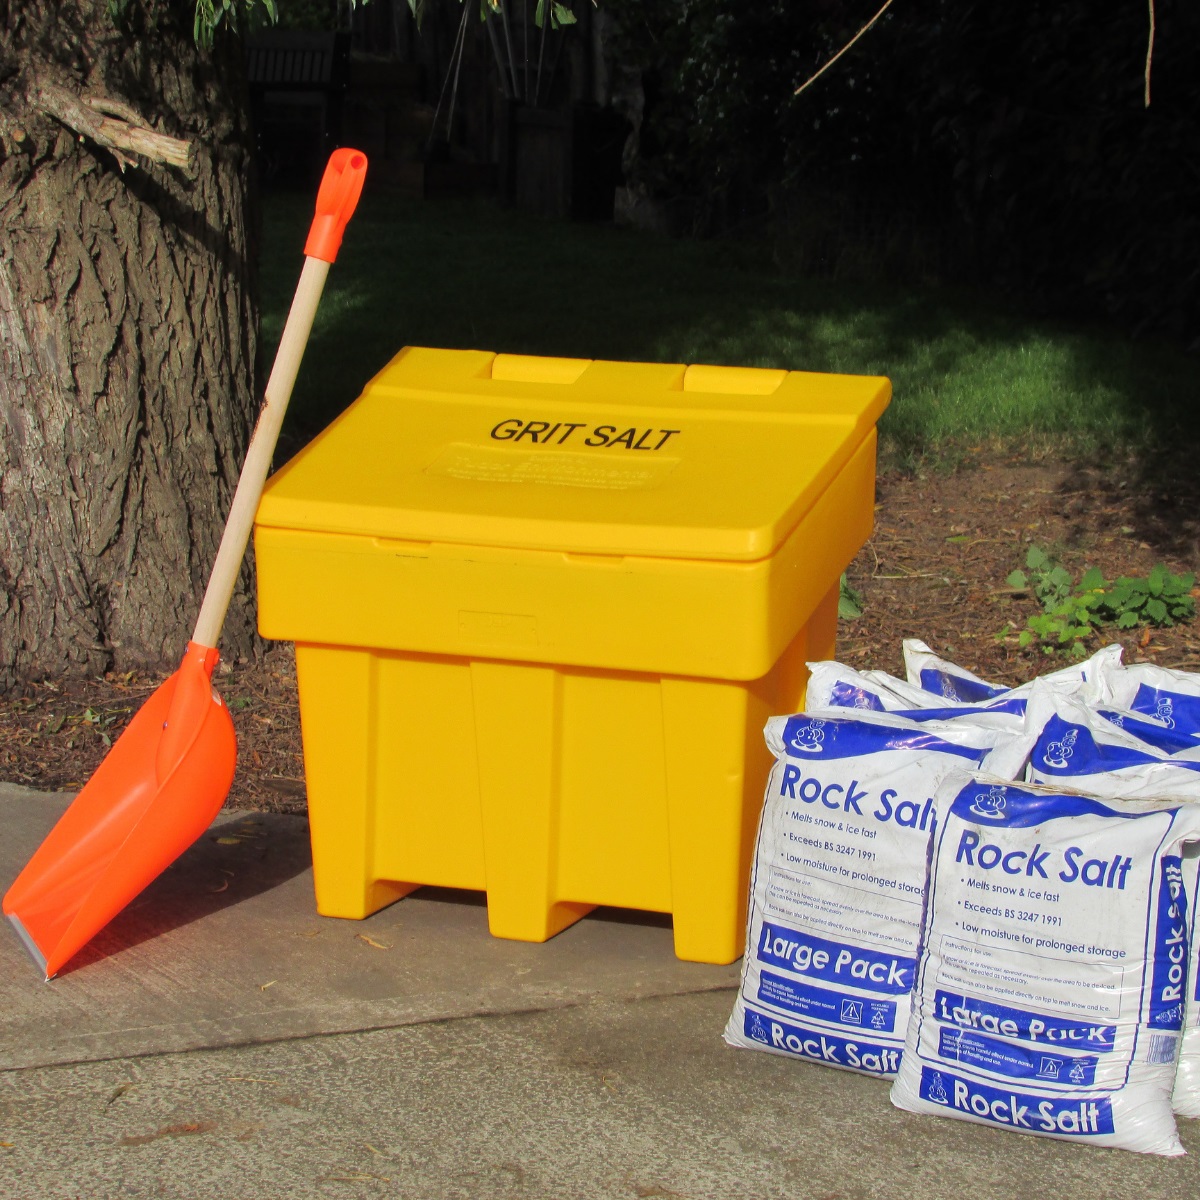 An orange snow shovel propped against a yellow grit bin with 6 bags of rock salt next to it